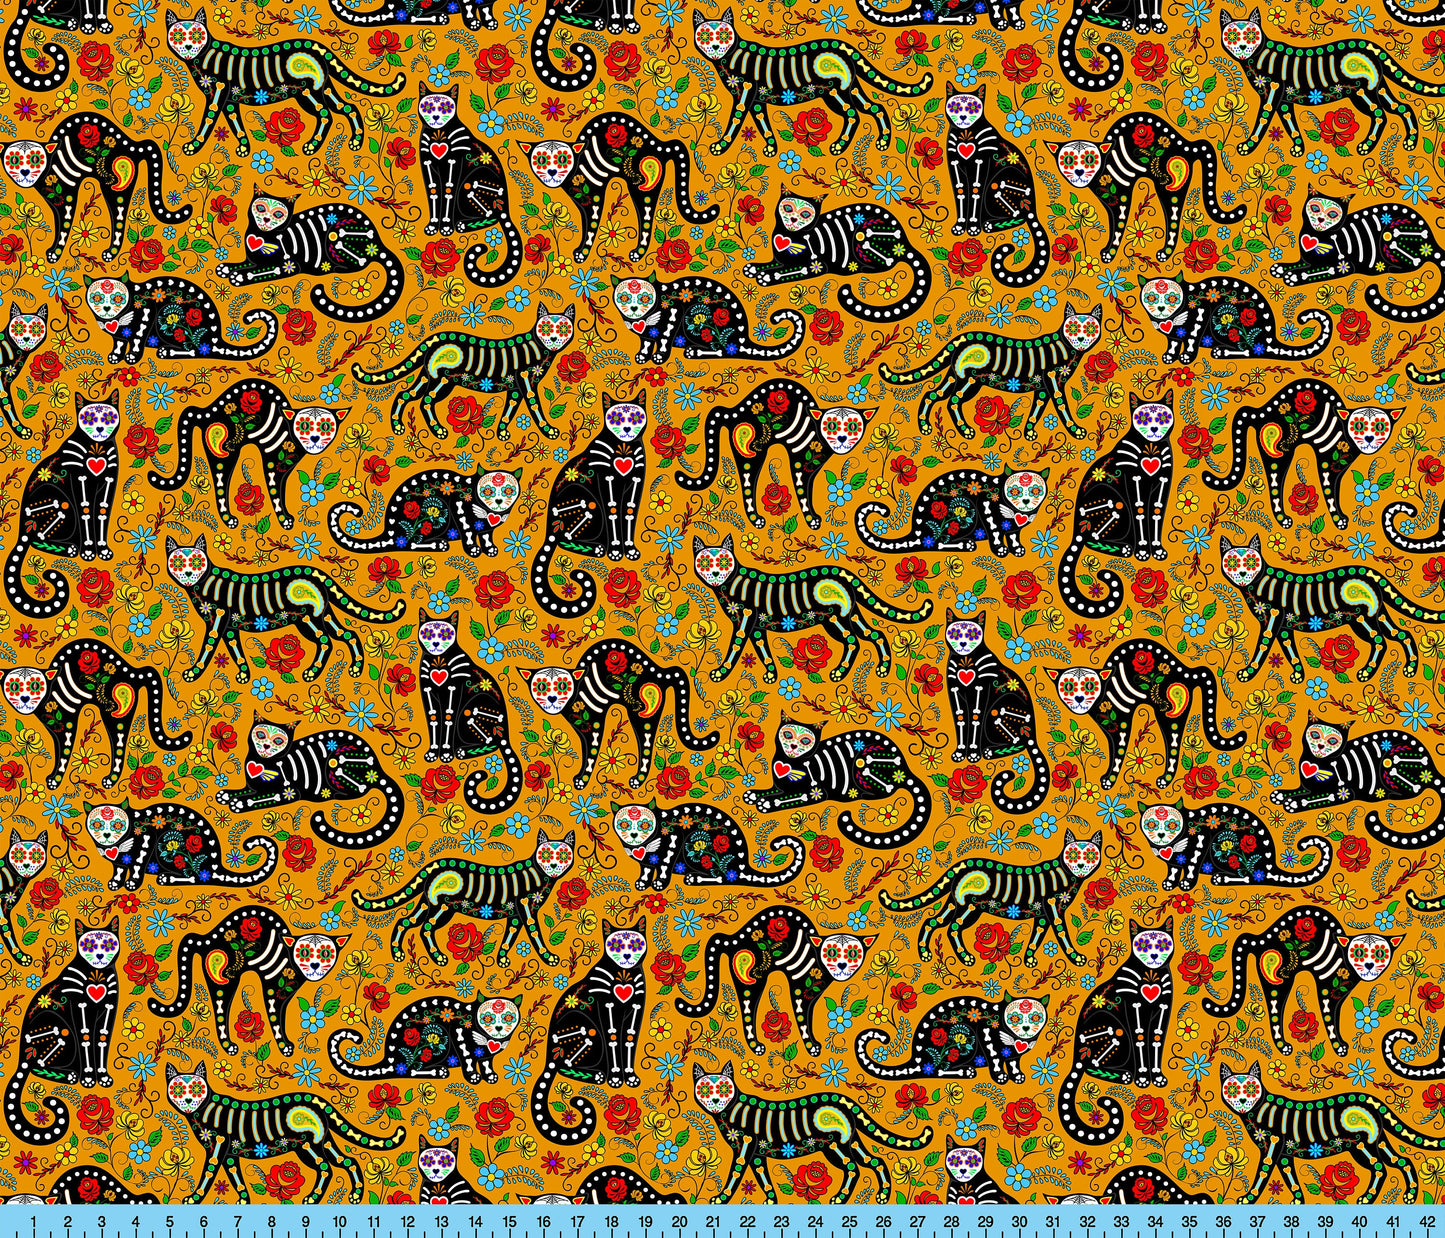 Mexican Cats Fabric Pattern, Calavera Cats Print, Day of the Dead Fabric By The Yard